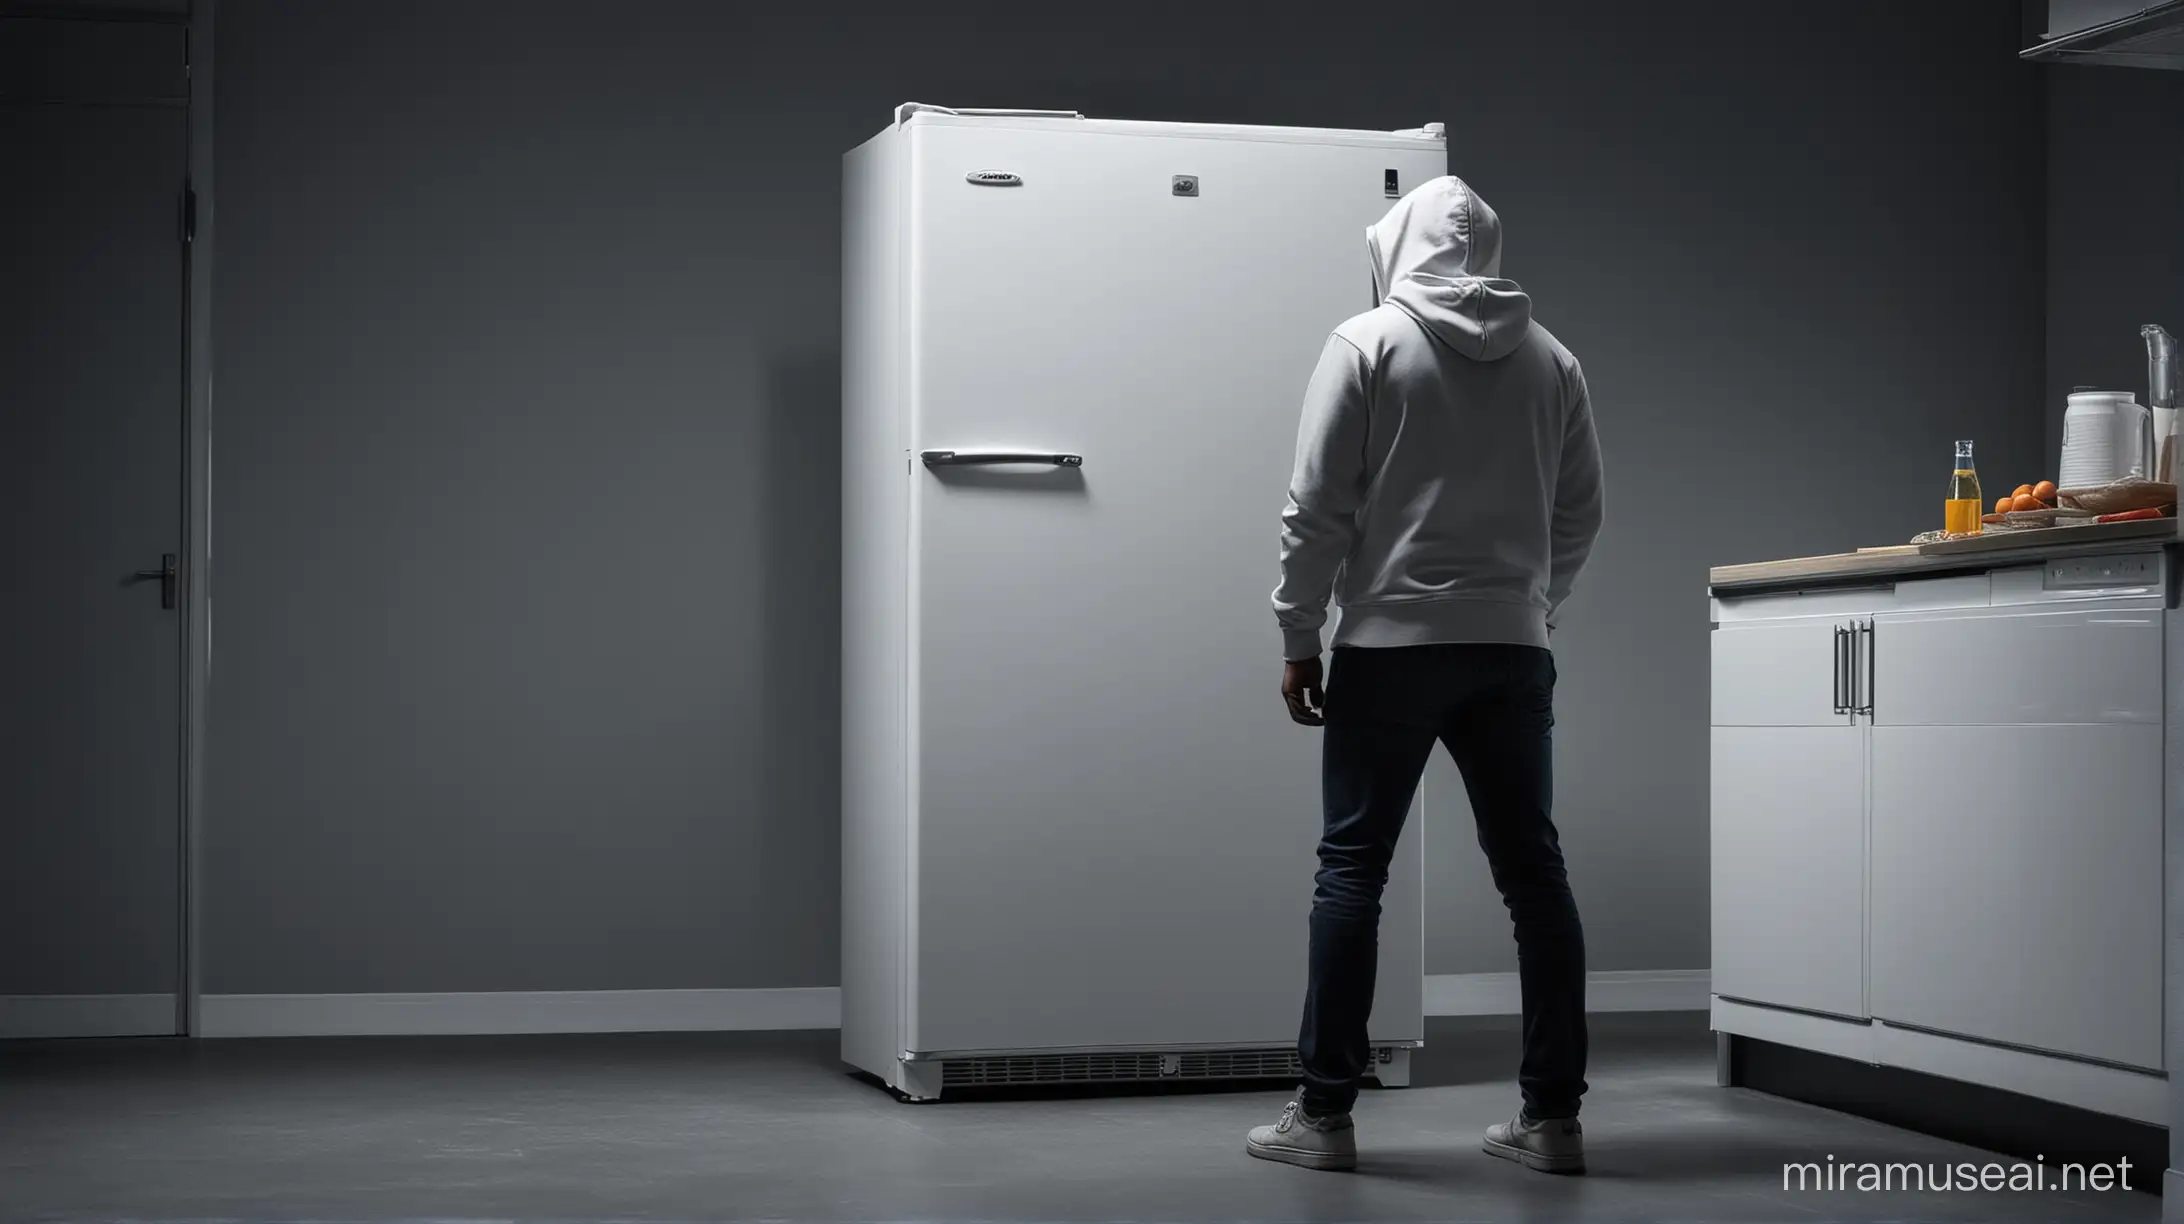 Mysterious Indian Man Stands Before White Deep Freezer in Dark Room